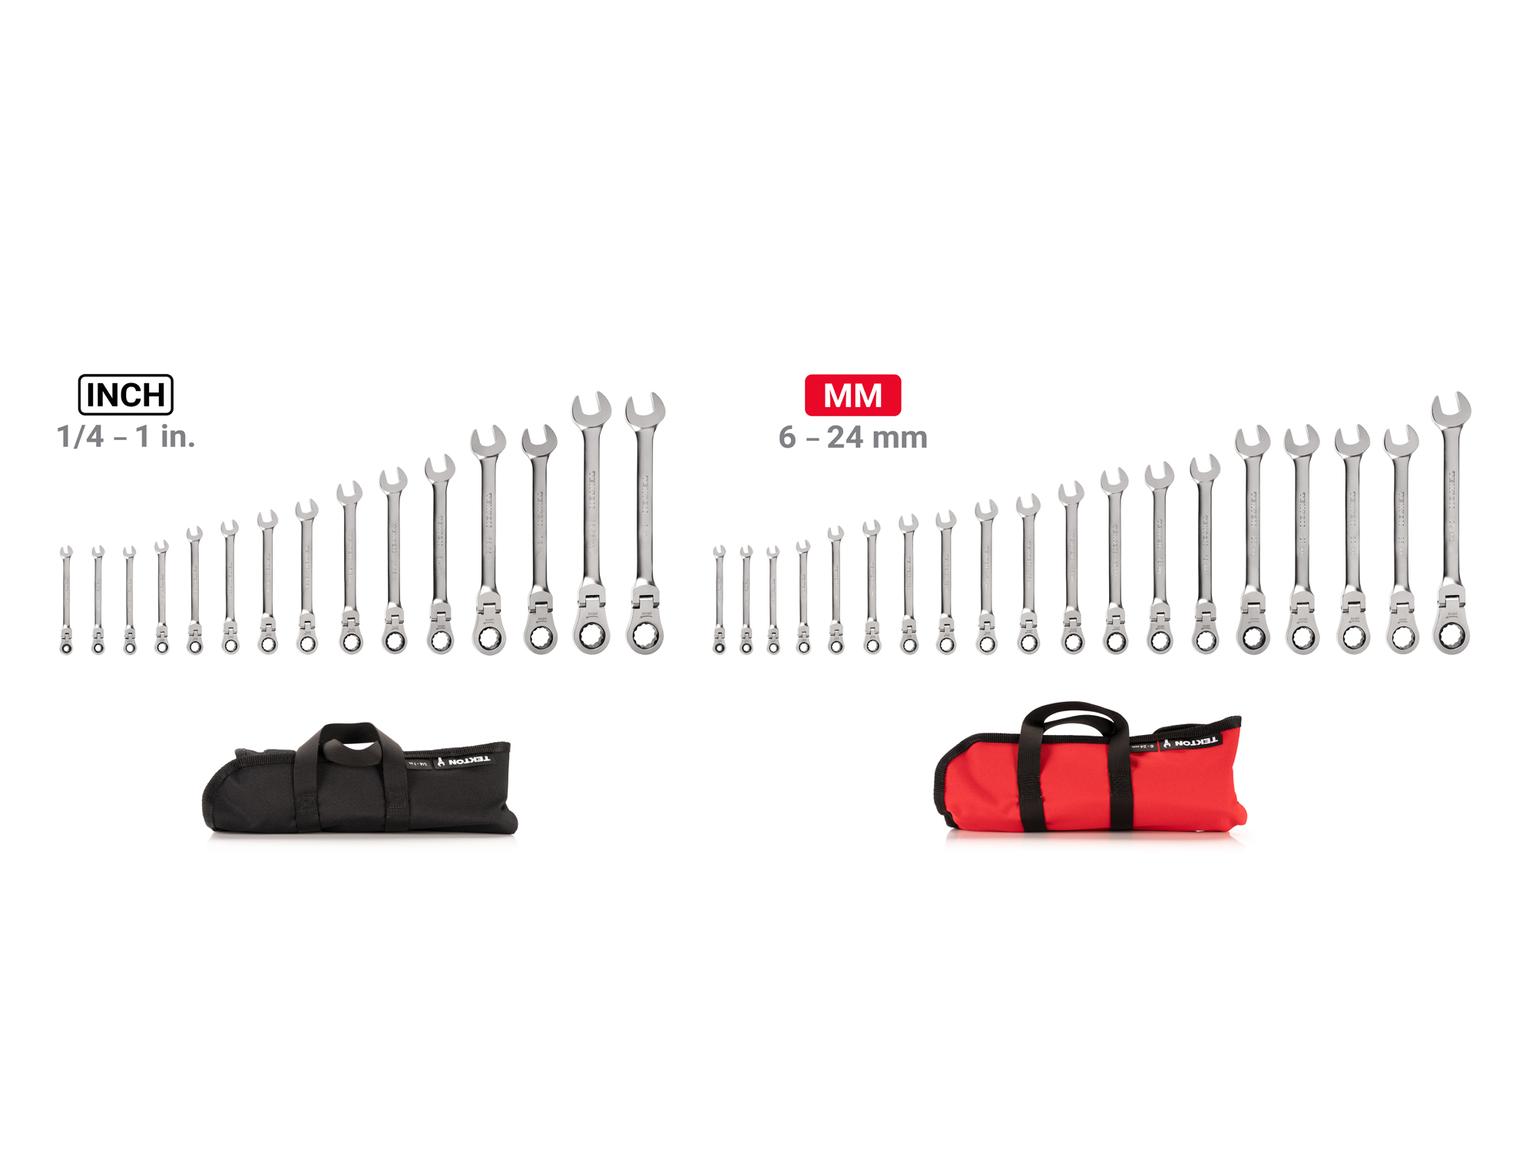 TEKTON WRC95405-T Flex Head 12-Point Ratcheting Combination Wrench Set with Pouch, 34-Piece (1/4-1 in., 6-24 mm)